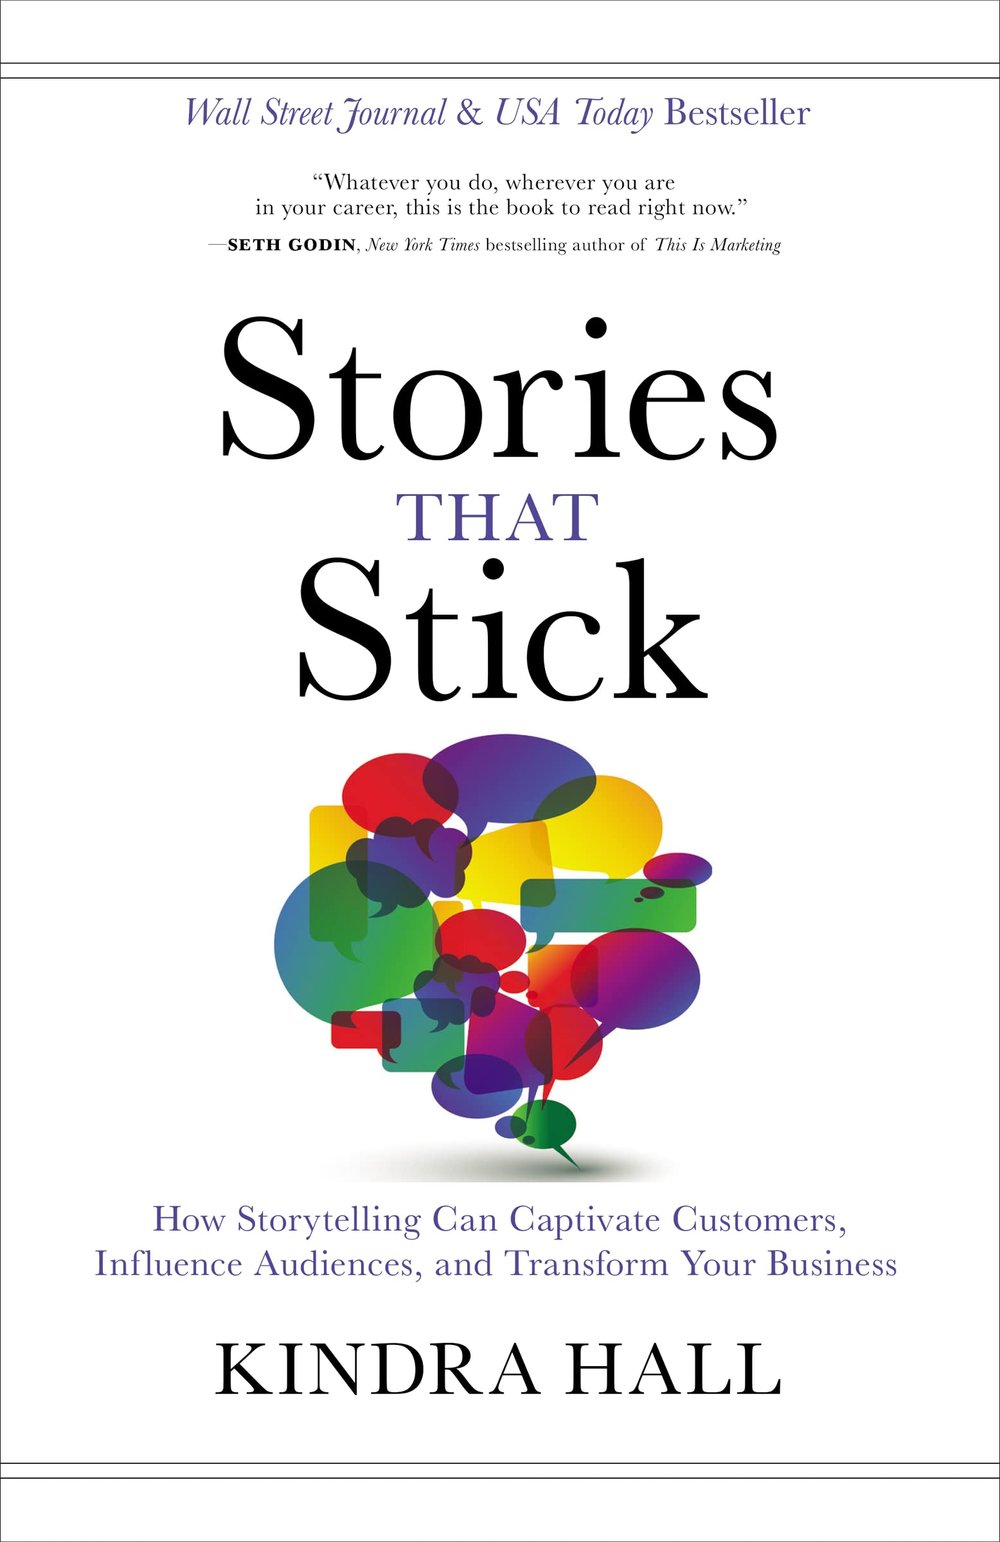 Stories That Stick by Kindra Hall